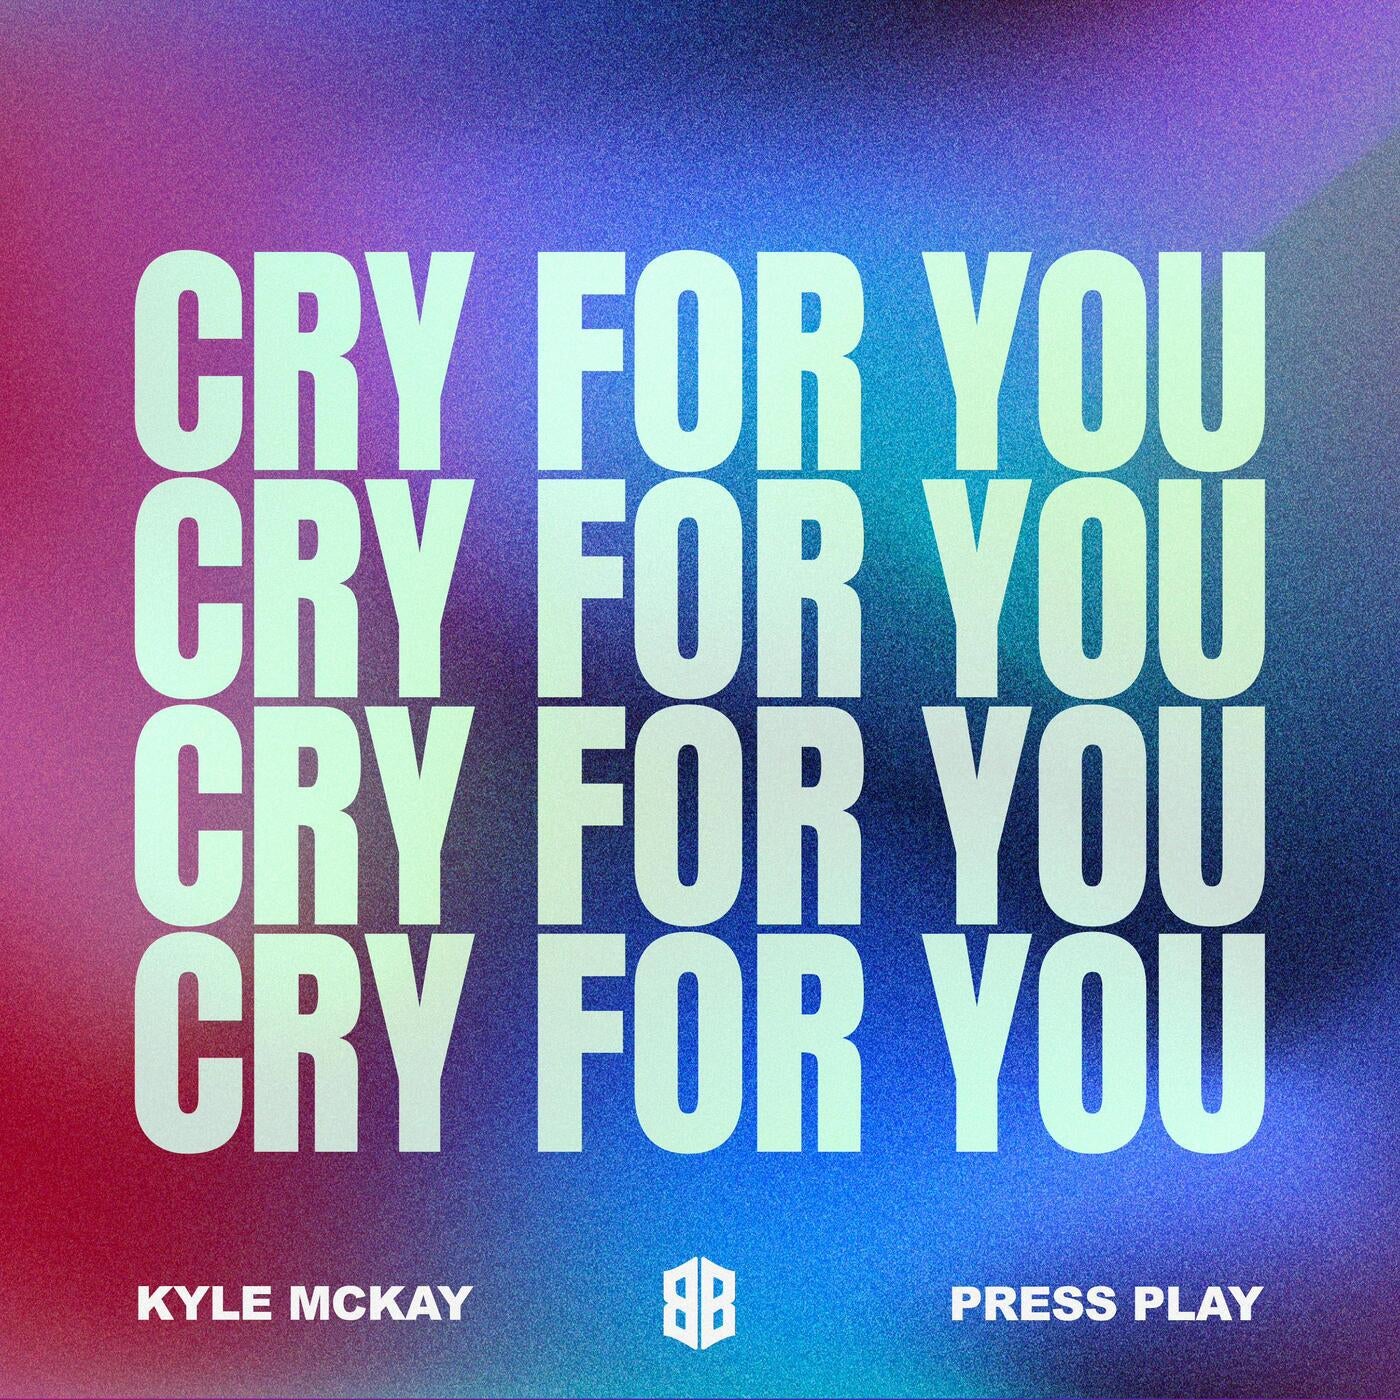 Cry For You (Radio Edit)